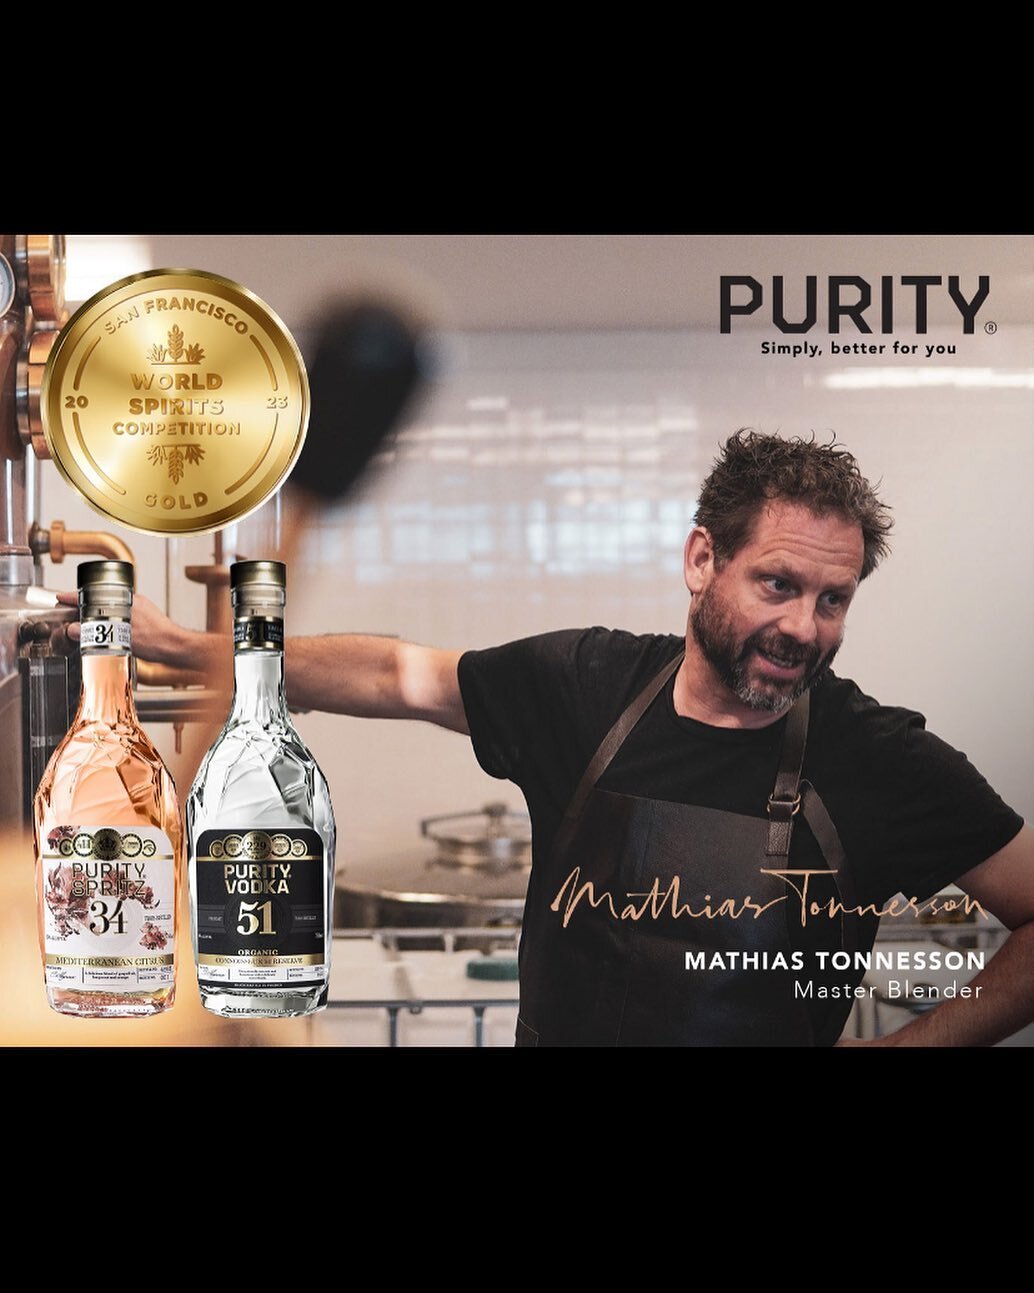 We brought home two Gold Medals from the San Francisco World Spirits Competition!  Thank you @sfwspiritscomp for the incredible honor!

Want to taste our award-winning vodkas? Visit puritydistillery.com, link in bio!

#PurityVodka #puritydistillery